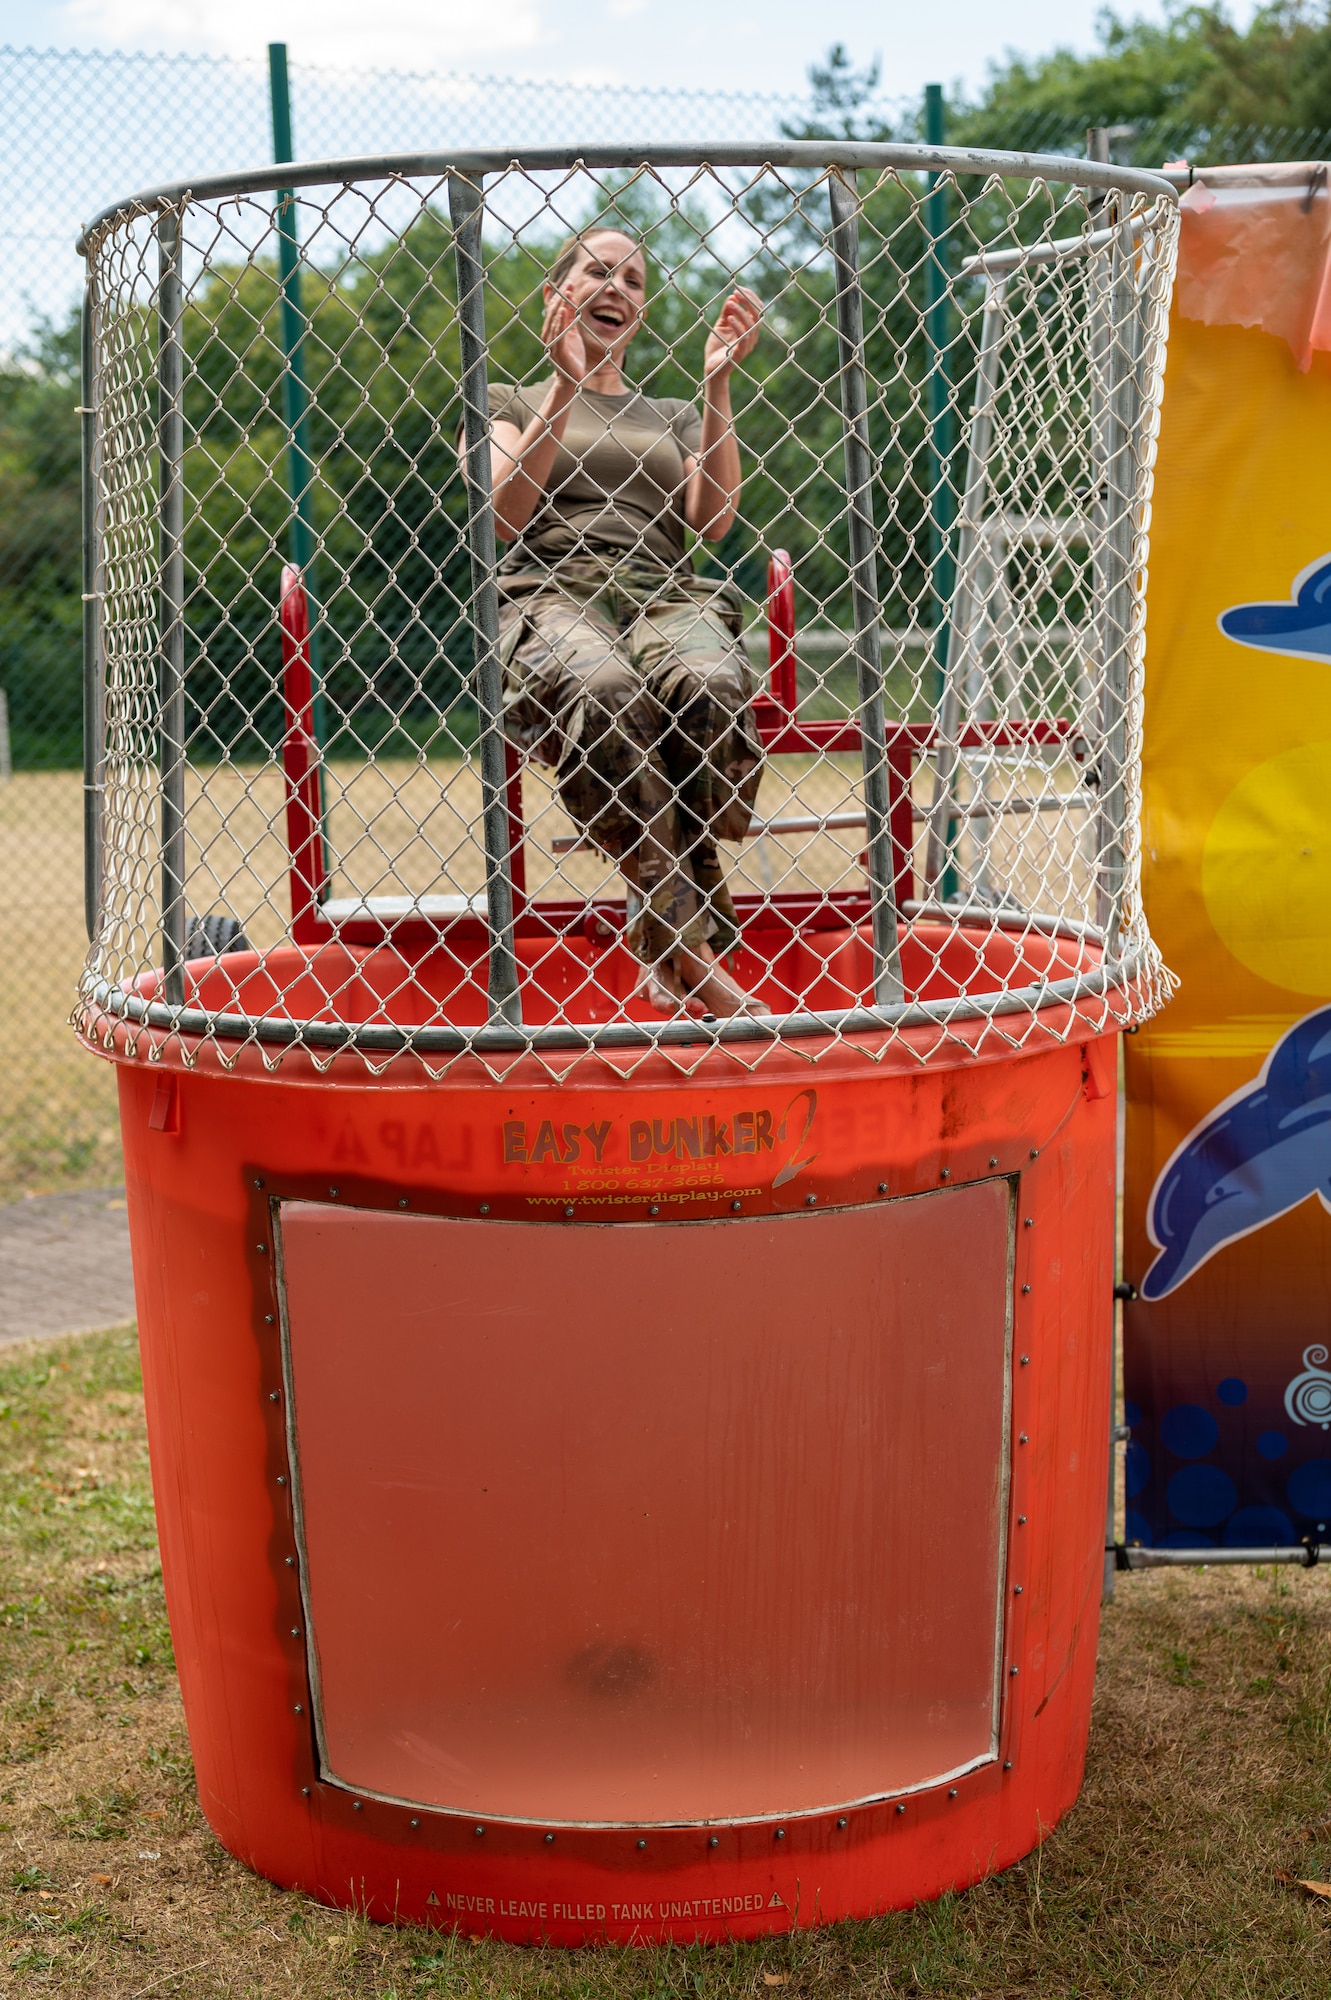 A person sitting in a dunk tank.